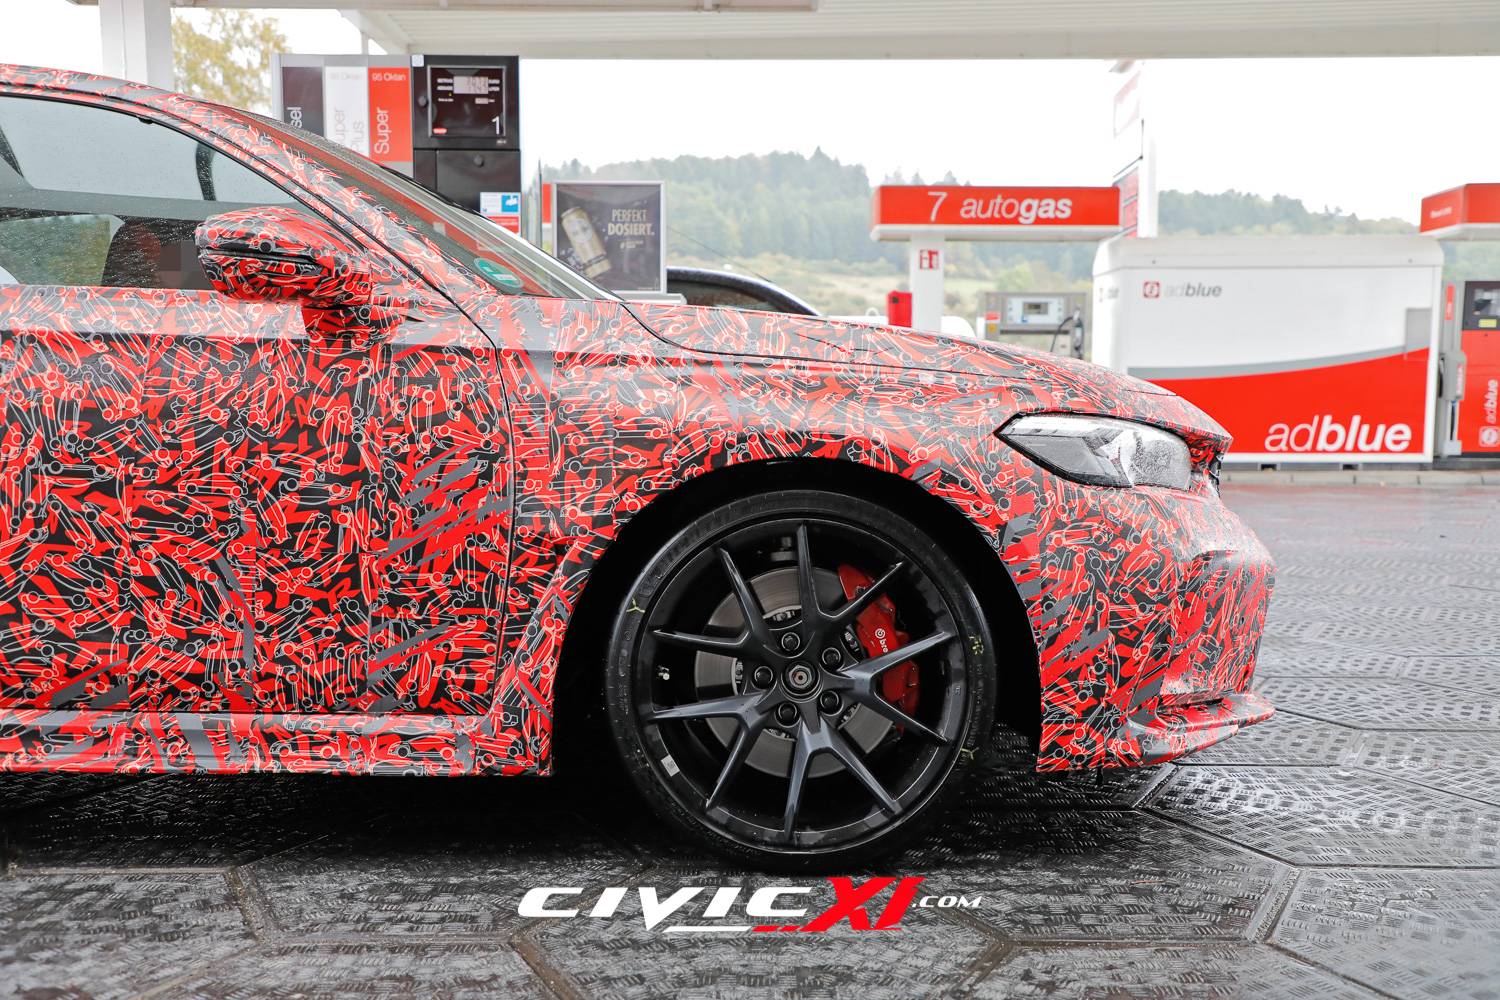 11th Gen Honda Civic ? 2022 Civic Type R Spied Inside & Out (First Interior Shots)! 265/30/19 tires revealed. 2022-civic-type-r-spied-interior-first-look-exterior-closeups-19